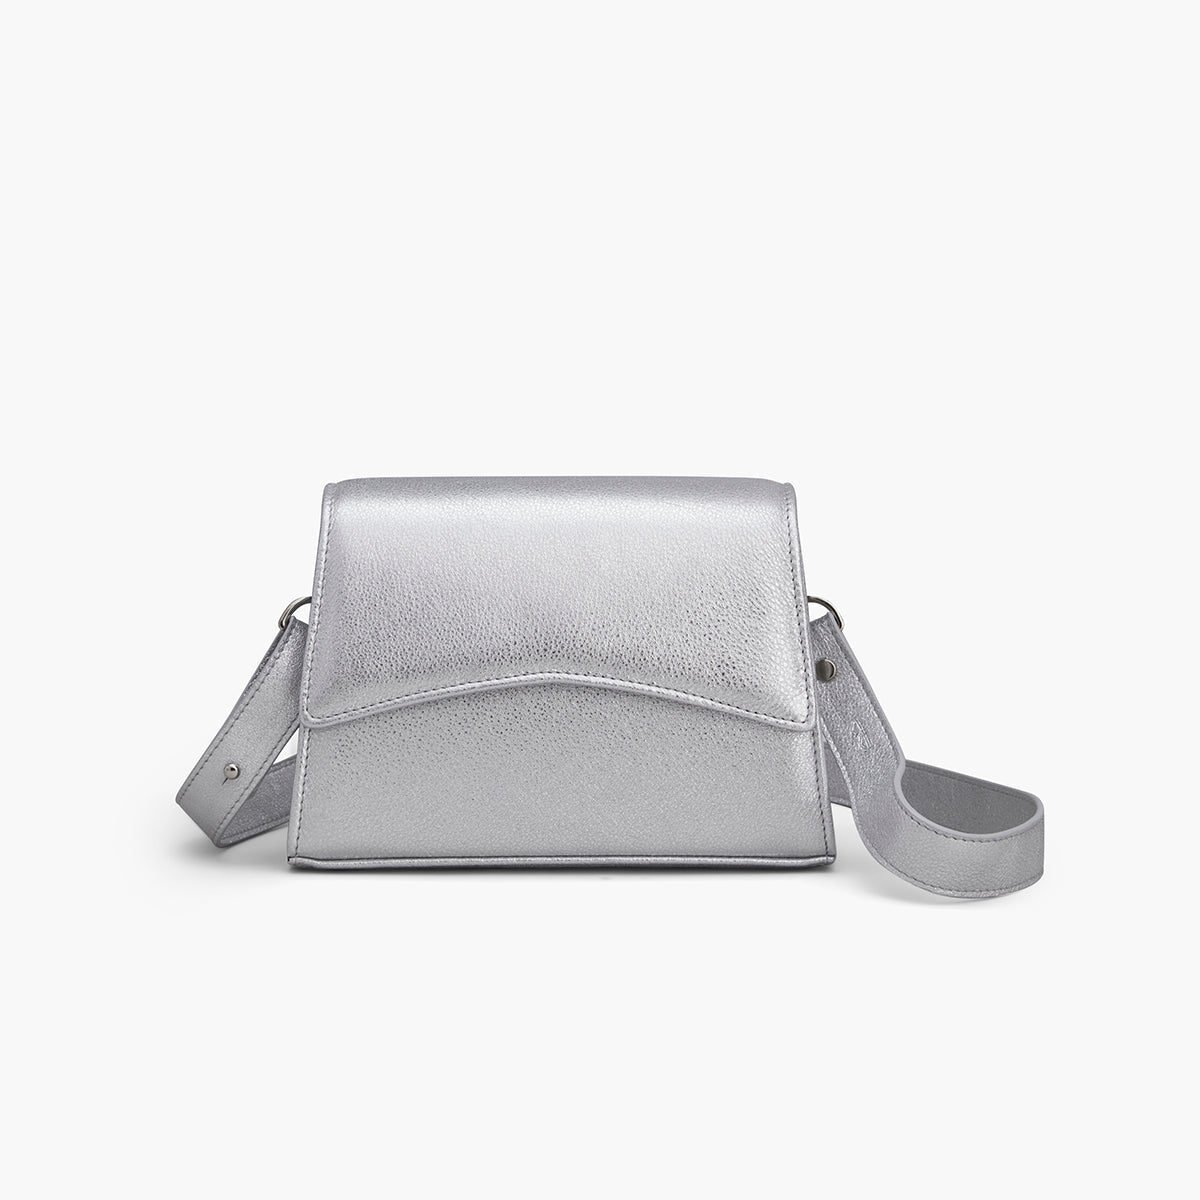 A silver shimmer grained leather handbag with silver metalware and an adjustable strap for a comfortable crossbody or shoulder fit.